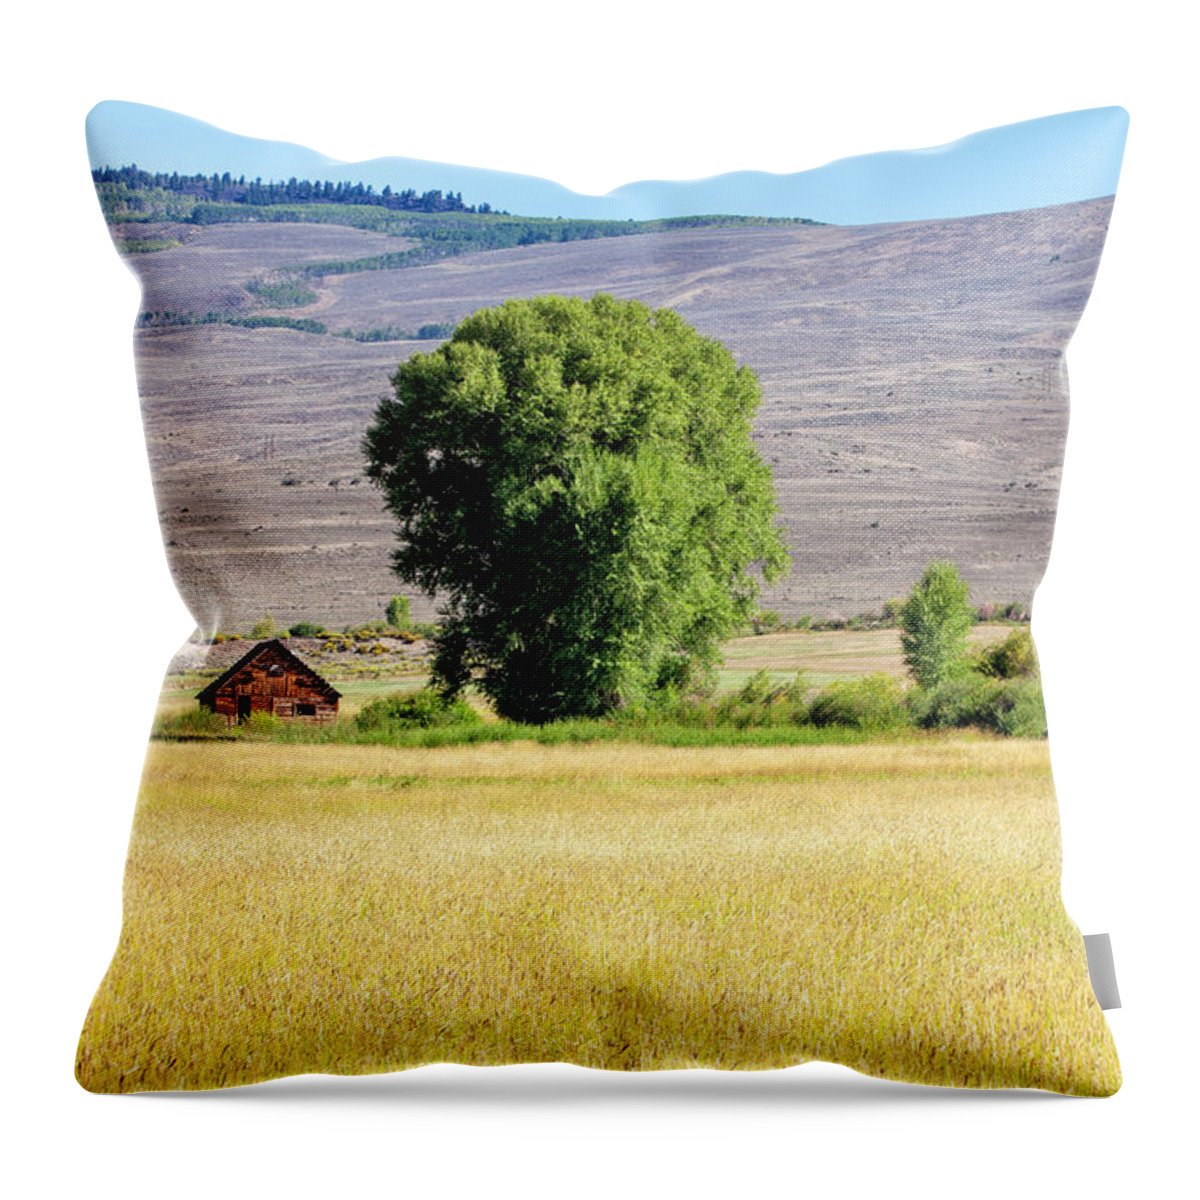 Hayfield Throw Pillow featuring the photograph Cabin Amid Hay Harvest by Denise Bush